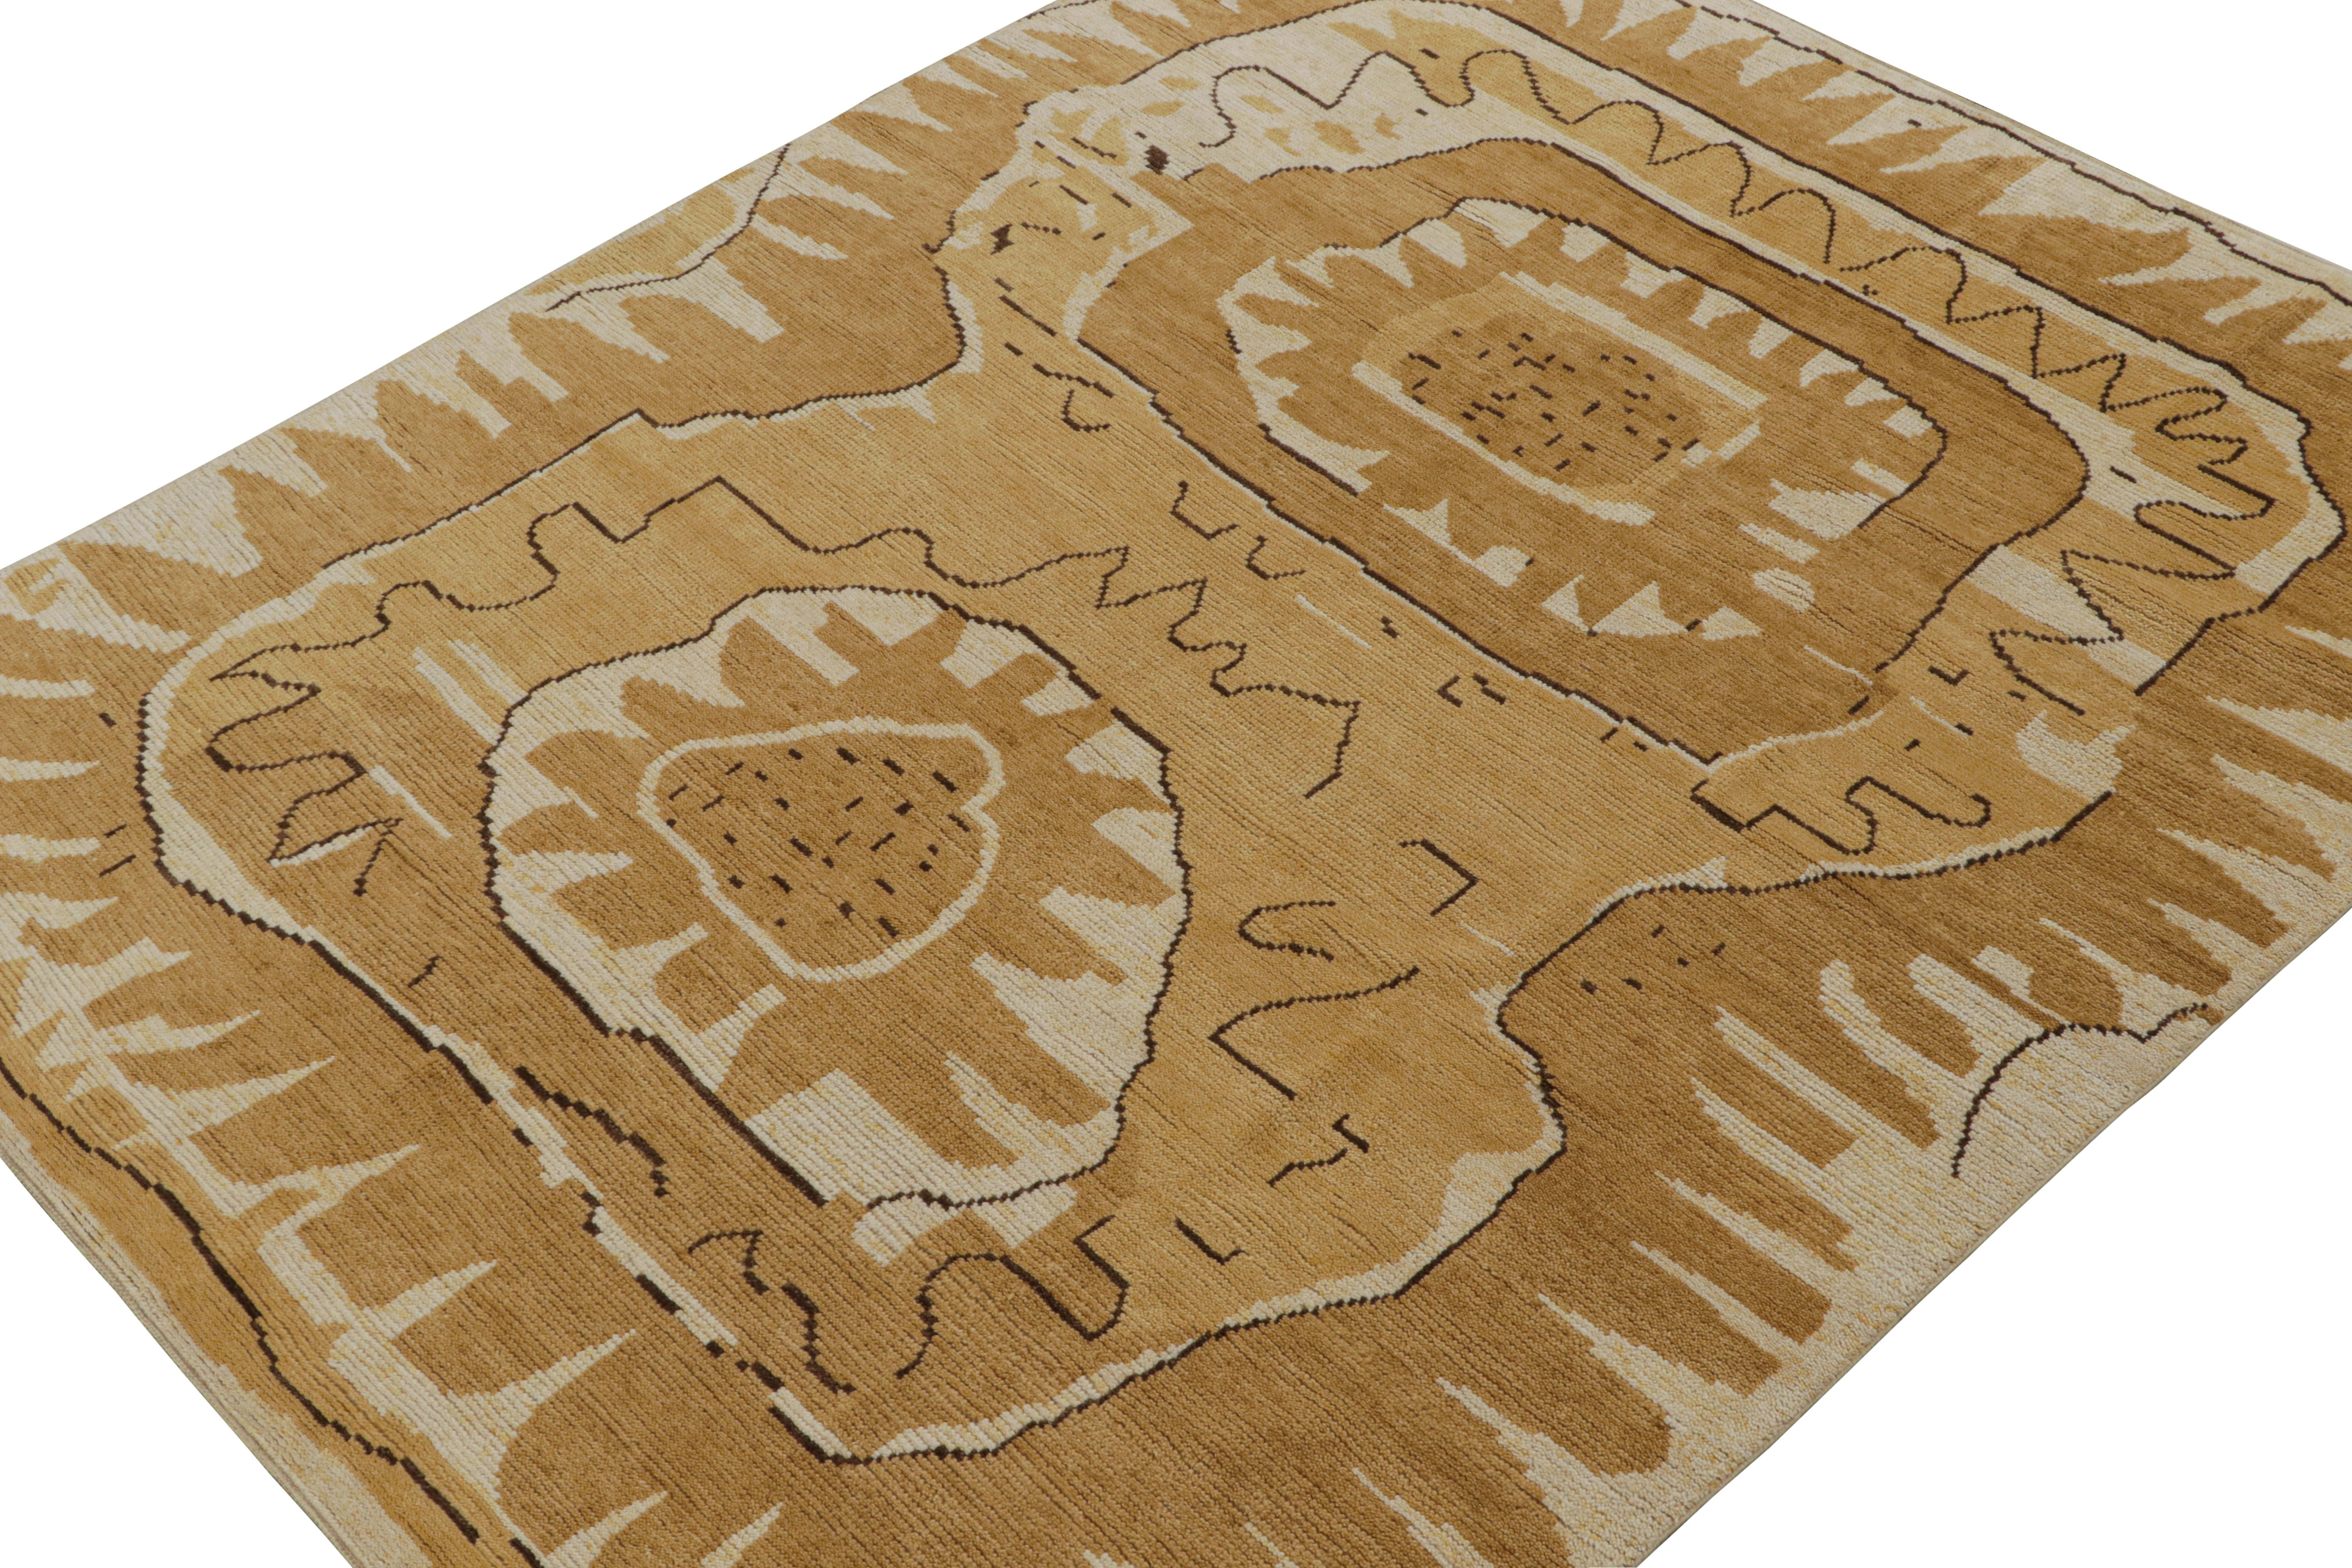 This 8x10 modern rug is a new addition to the Scandinavian rug collection by Rug & Kilim. Hand-knotted in wool, its design is a contemporary take on Rollakan and Rya rugs in the Swedish Deco style.

On the Design:

This piece draws on the more